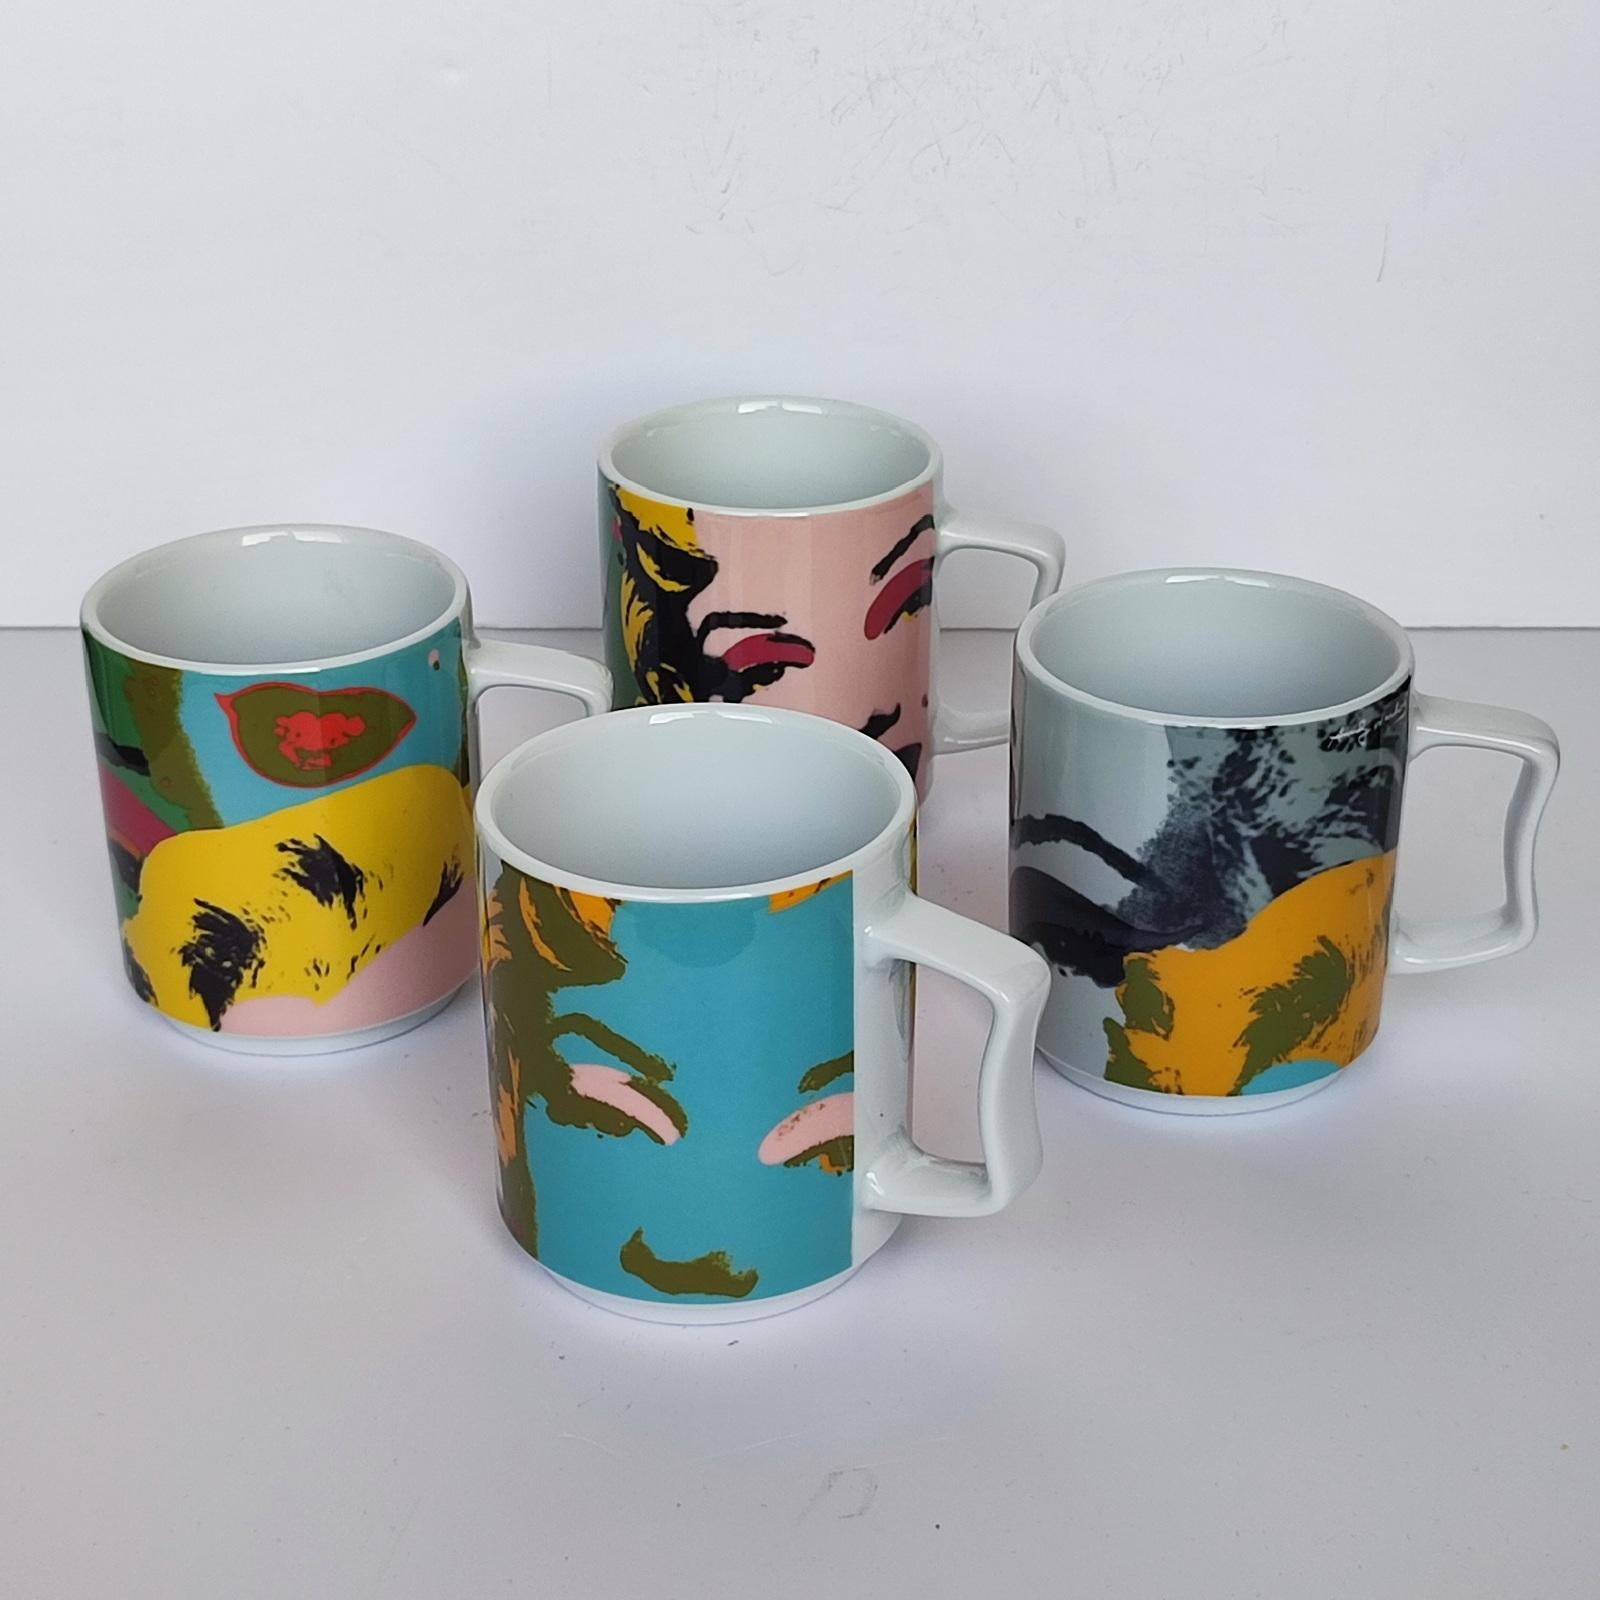 The Marilyn Monroe series in porcelain is taken from an original silkscreen by Andy Warhol and includes mugs with the iconic Marilyn face. Made by Rosenthal, Studio Line, this set of 4 porcelain mugs is decorated with the Marilyn Monroe series by